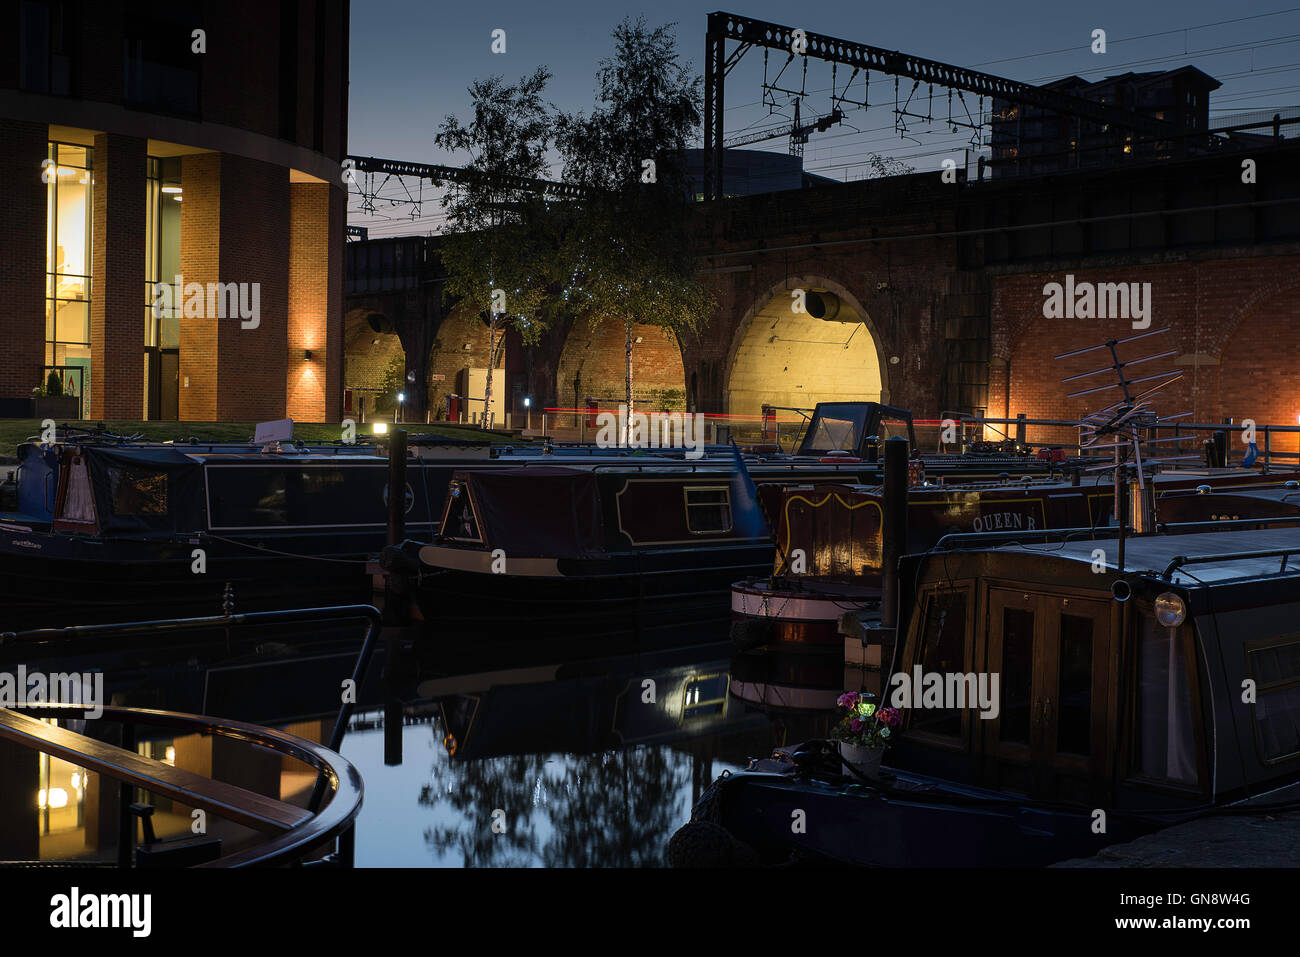 Houseboats moored with the arches under Leeds Railway station and buildings lit up under the late evening sky. Stock Photo